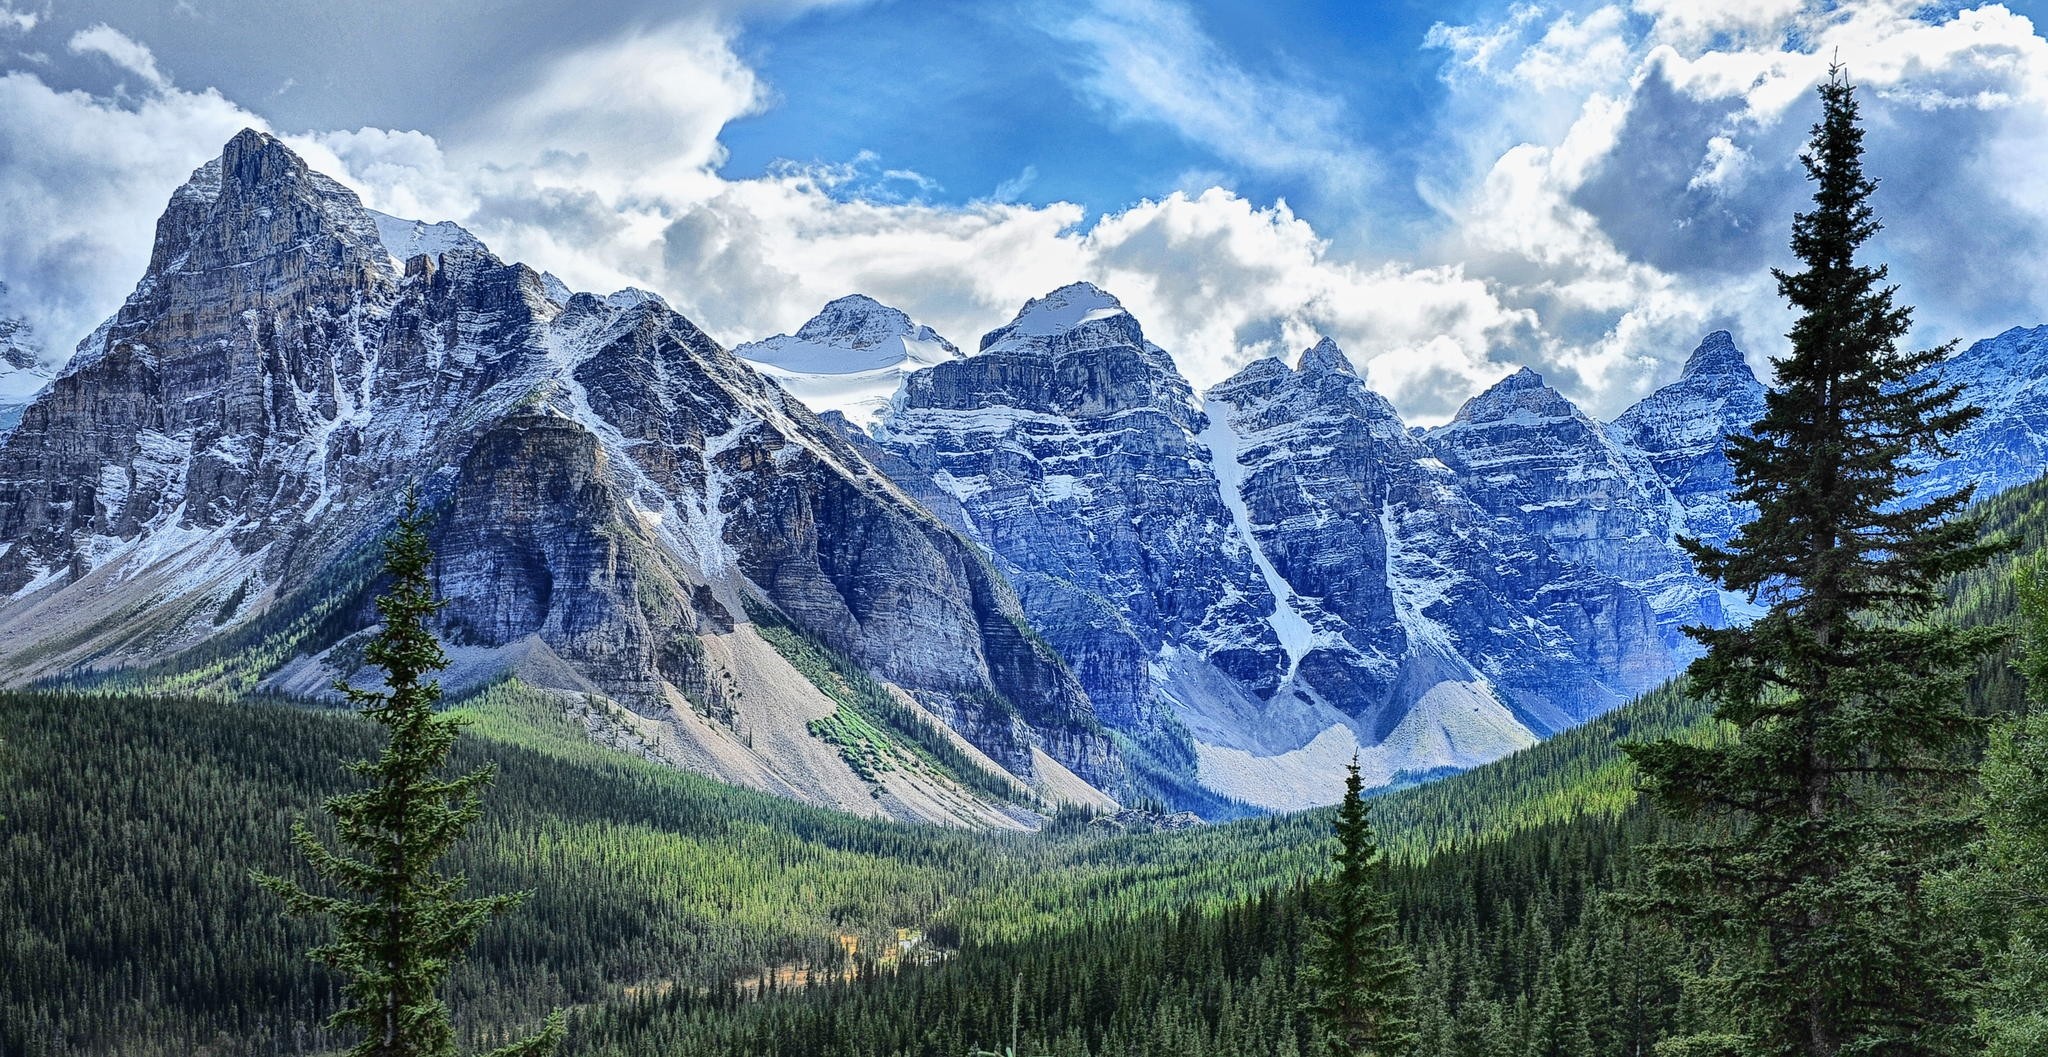 General 2048x1057 landscape nature mountains forest snowy peak clouds pine trees Banff National Park Canada